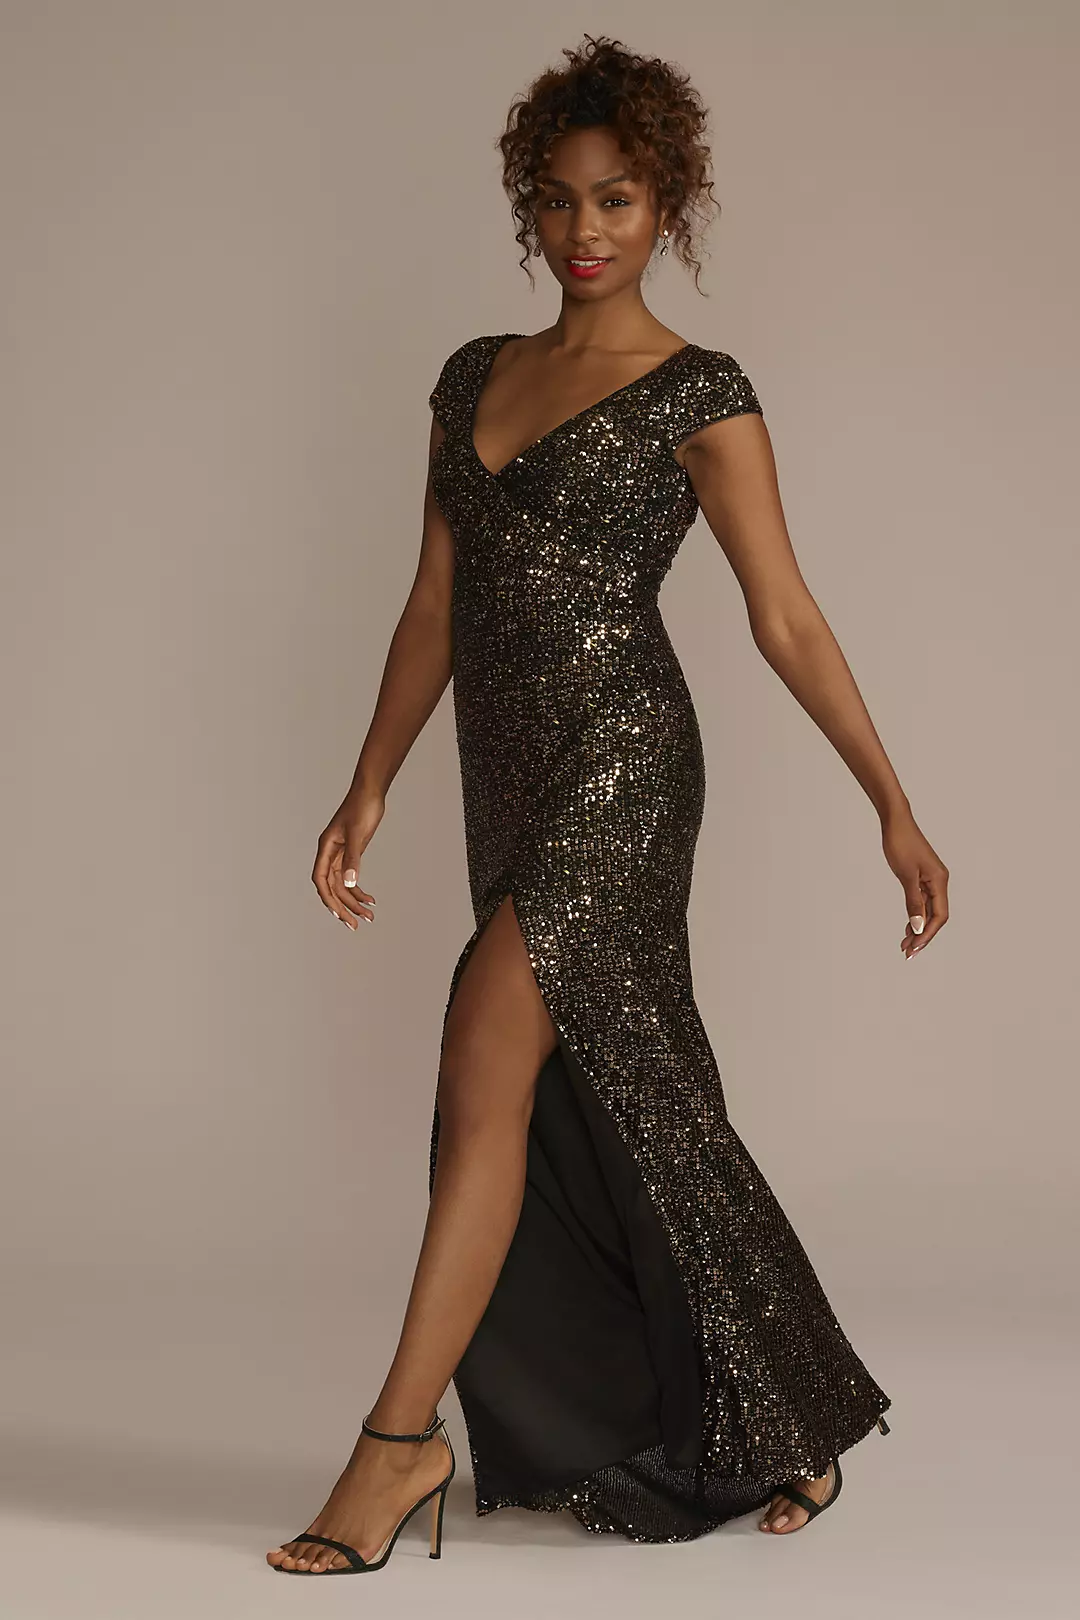 Cap Sleeve Allover Sequin Sheath Dress with Slit Image